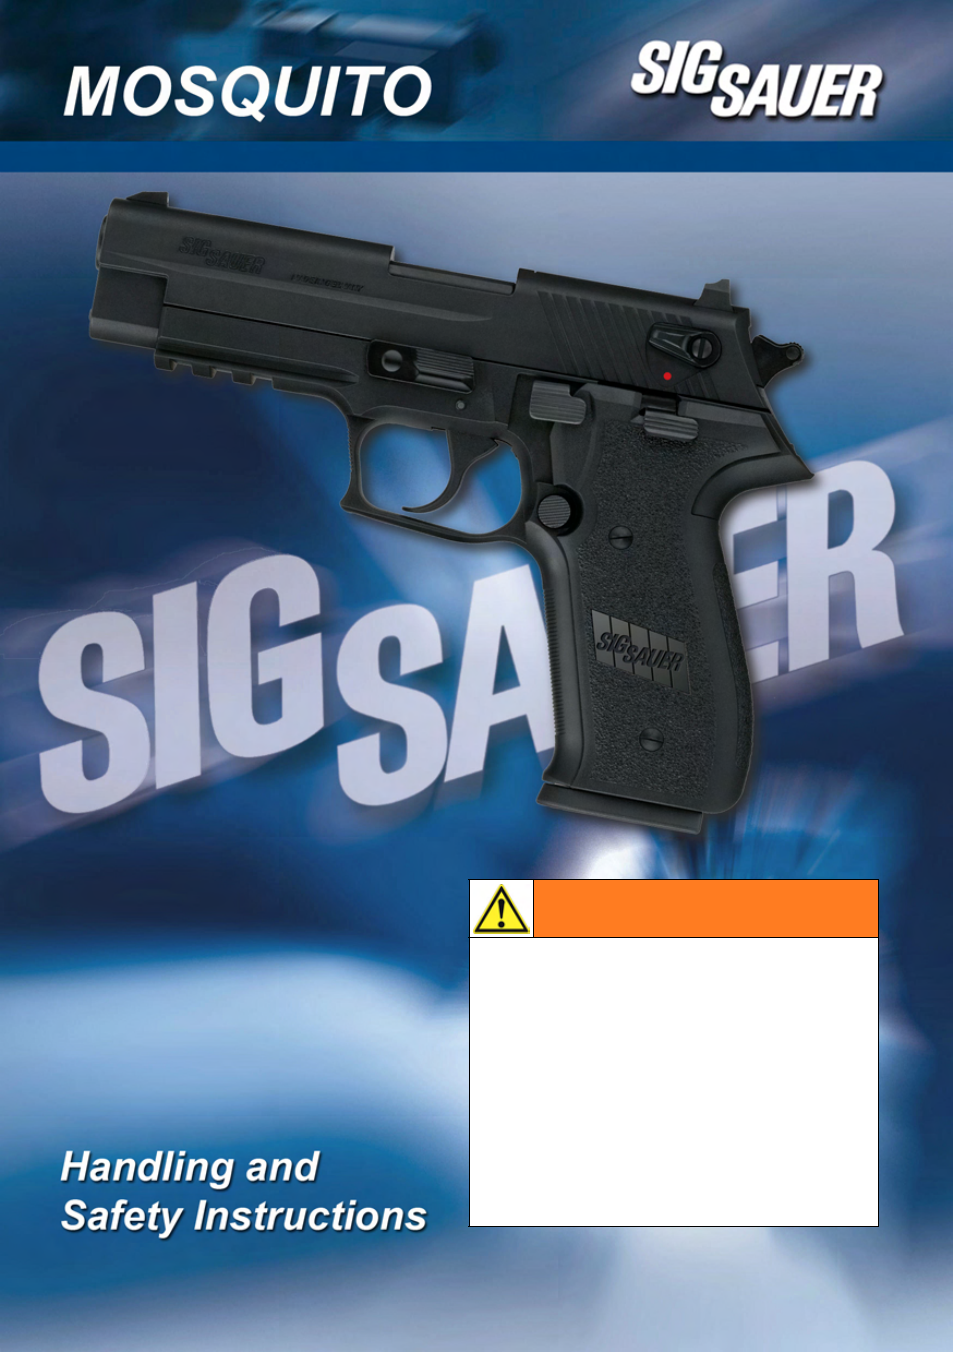 SIG SAUER ARMS OWNERS MANUAL MOSQUITO 28 PAGES